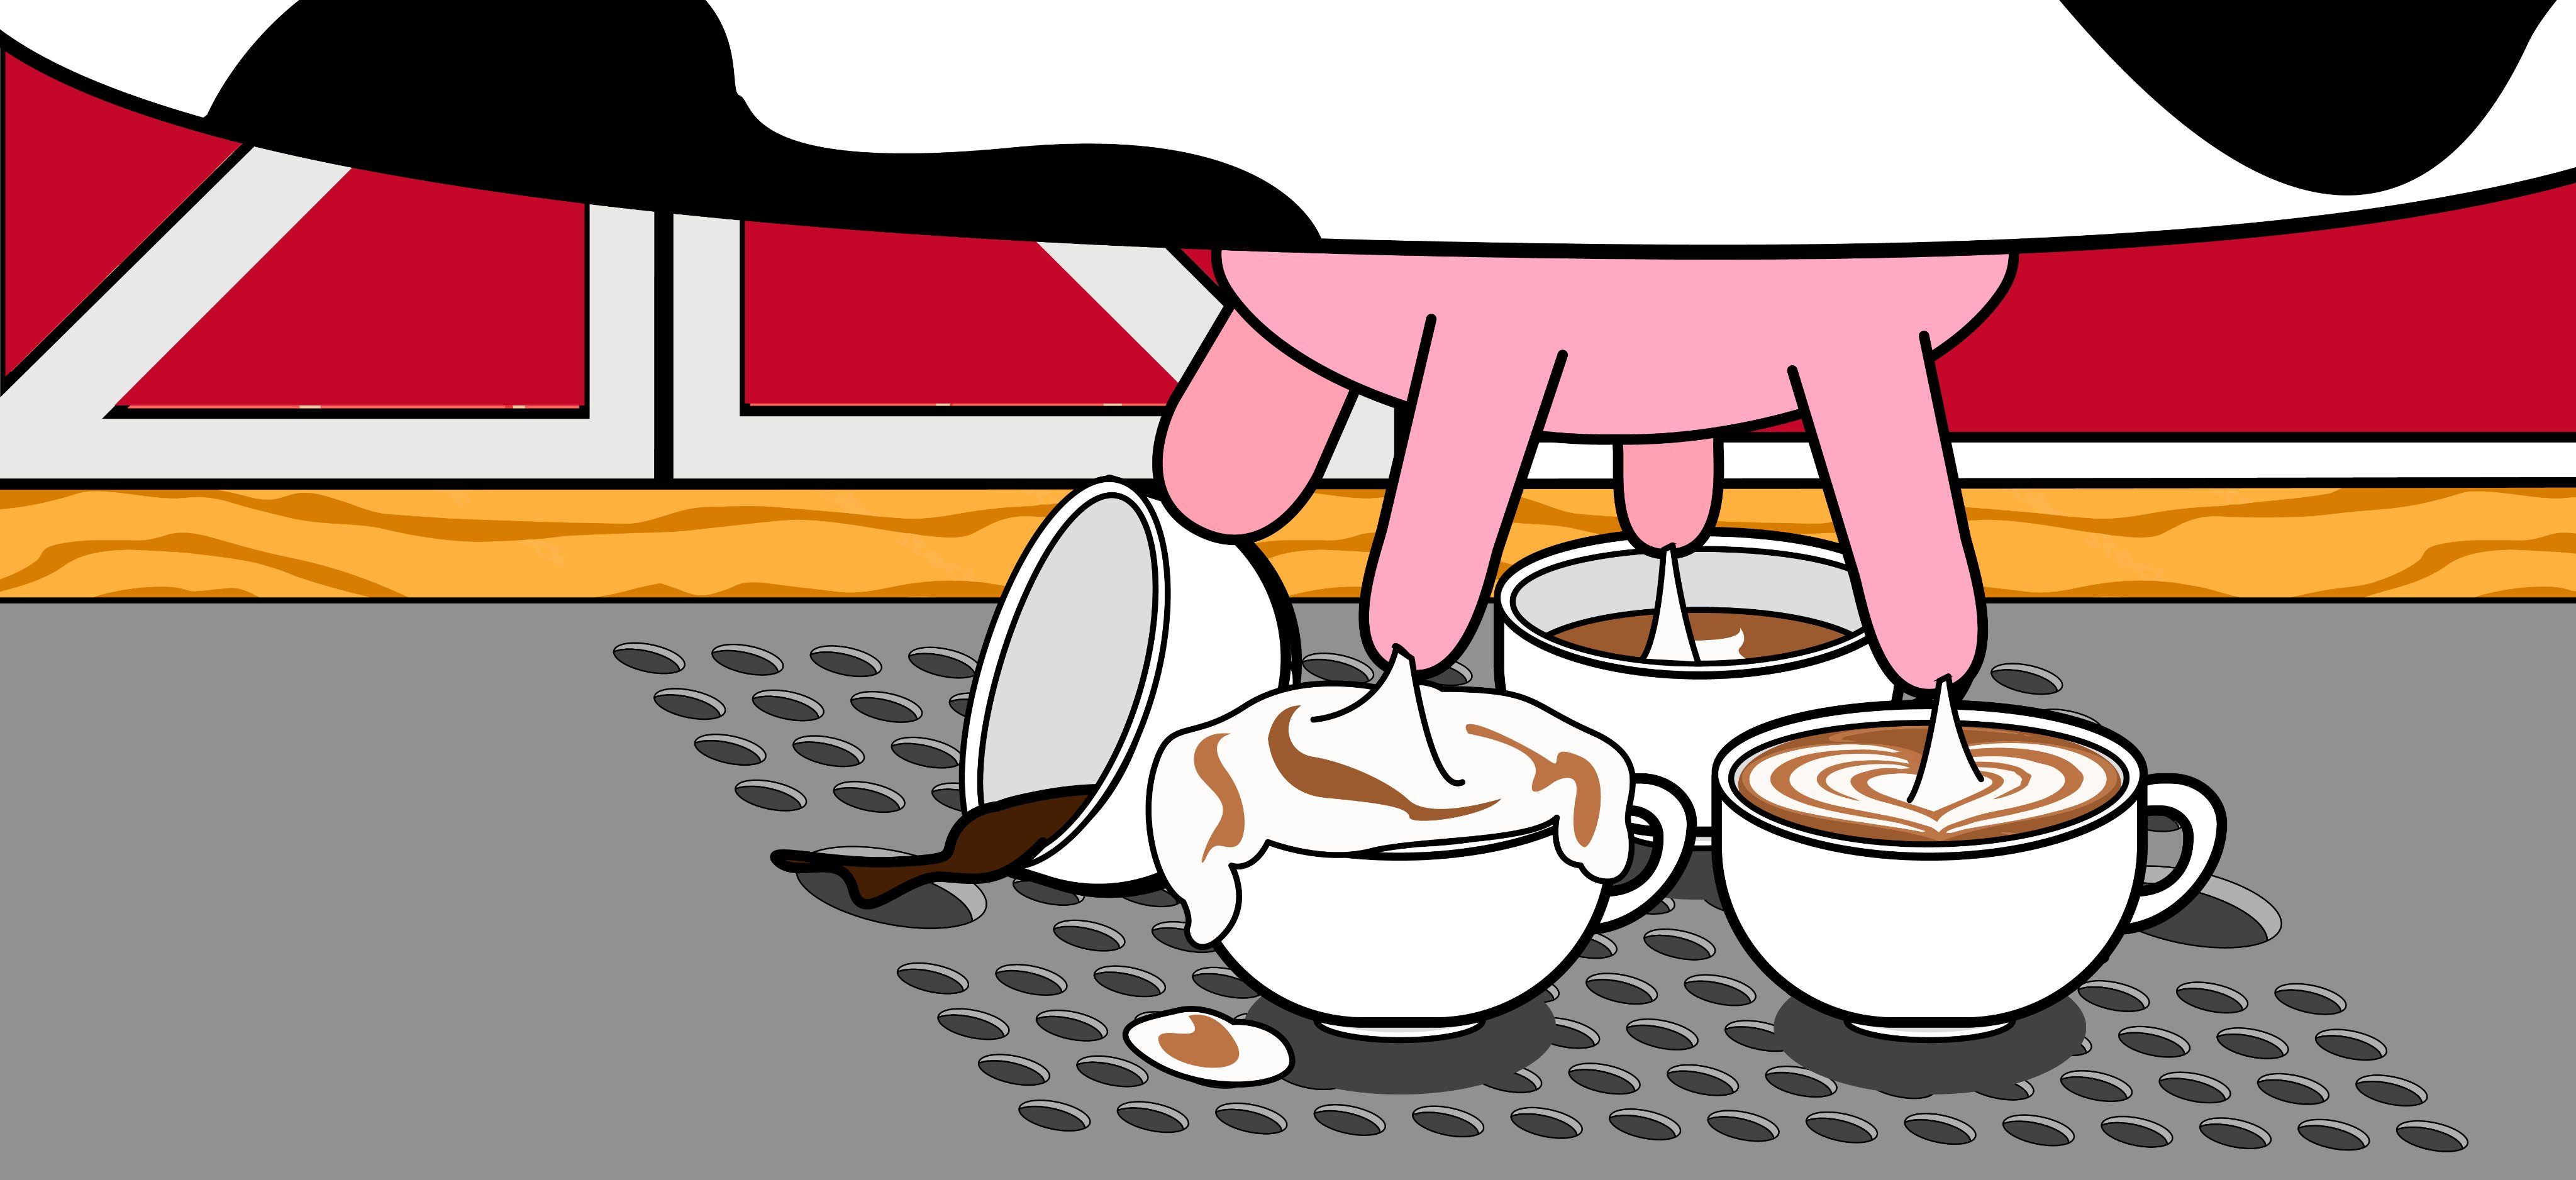 Illustration of a cow udder above a bunch of partially filled coffee cups, some overflowing, some tipped over